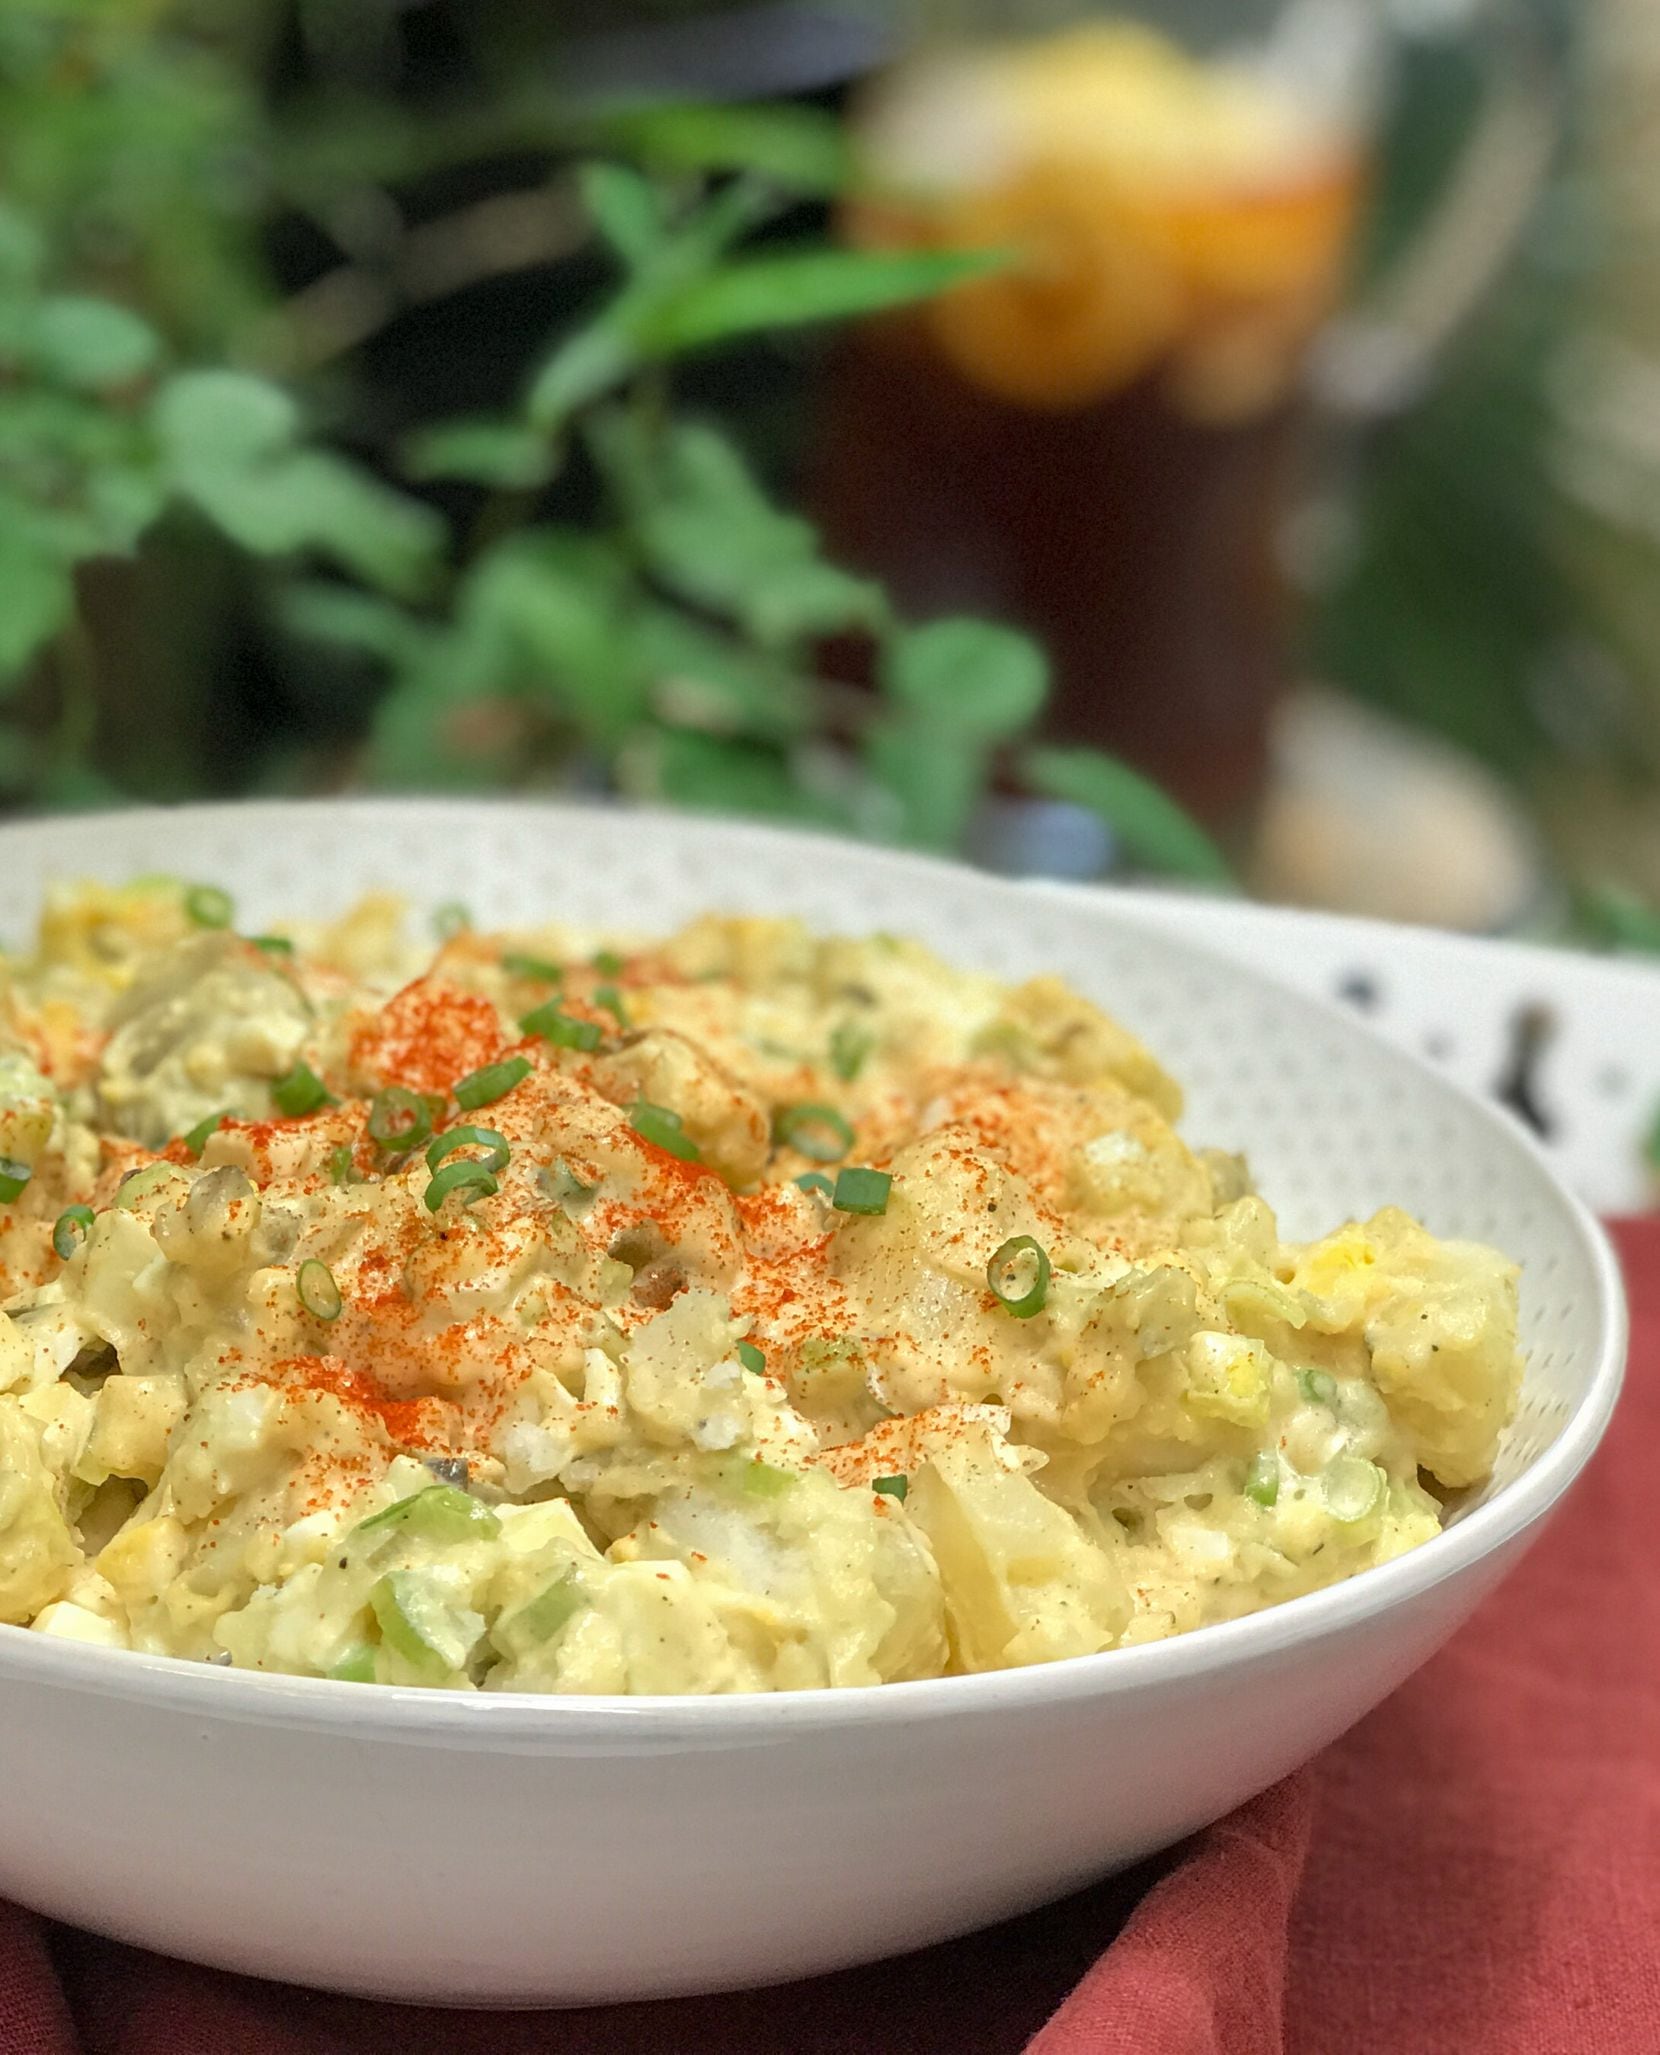 Country-Style Potato Salad from "Jubilee: Recipes From Two Centuries of African American...